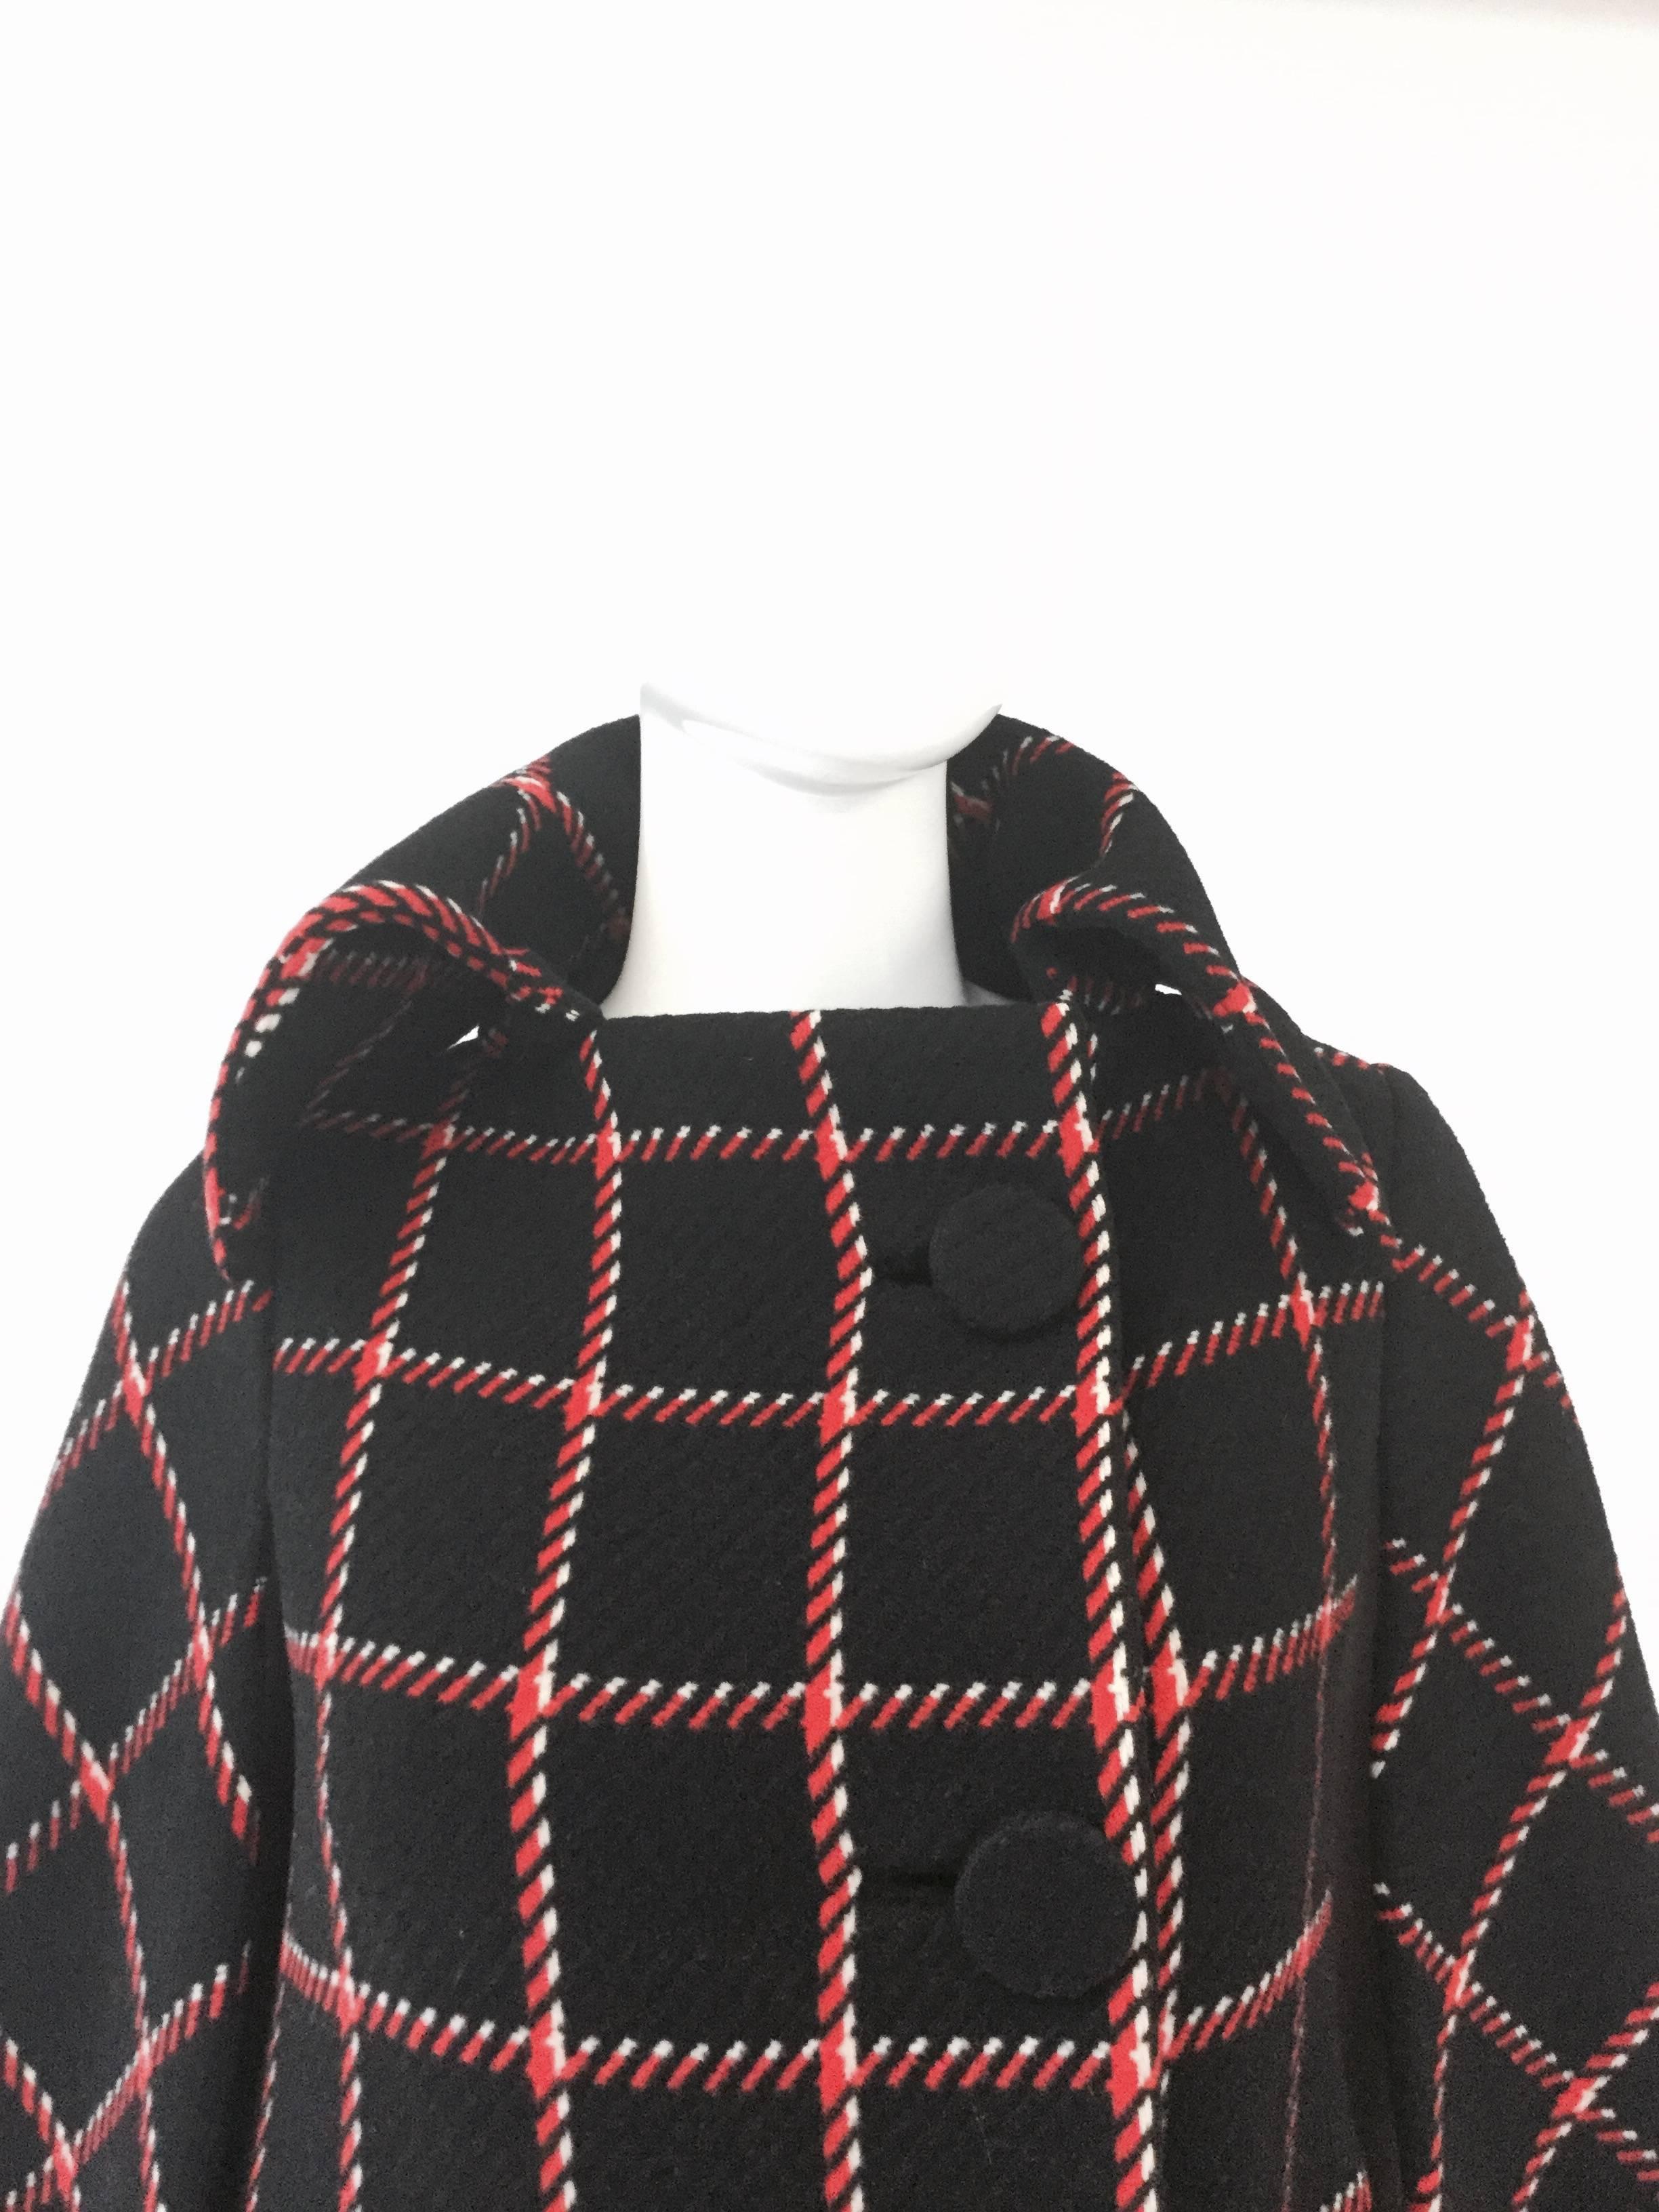 1970s Pauline Trigere Black and Red Plaid Wool Cape and Skirt  In Good Condition For Sale In Houston, TX